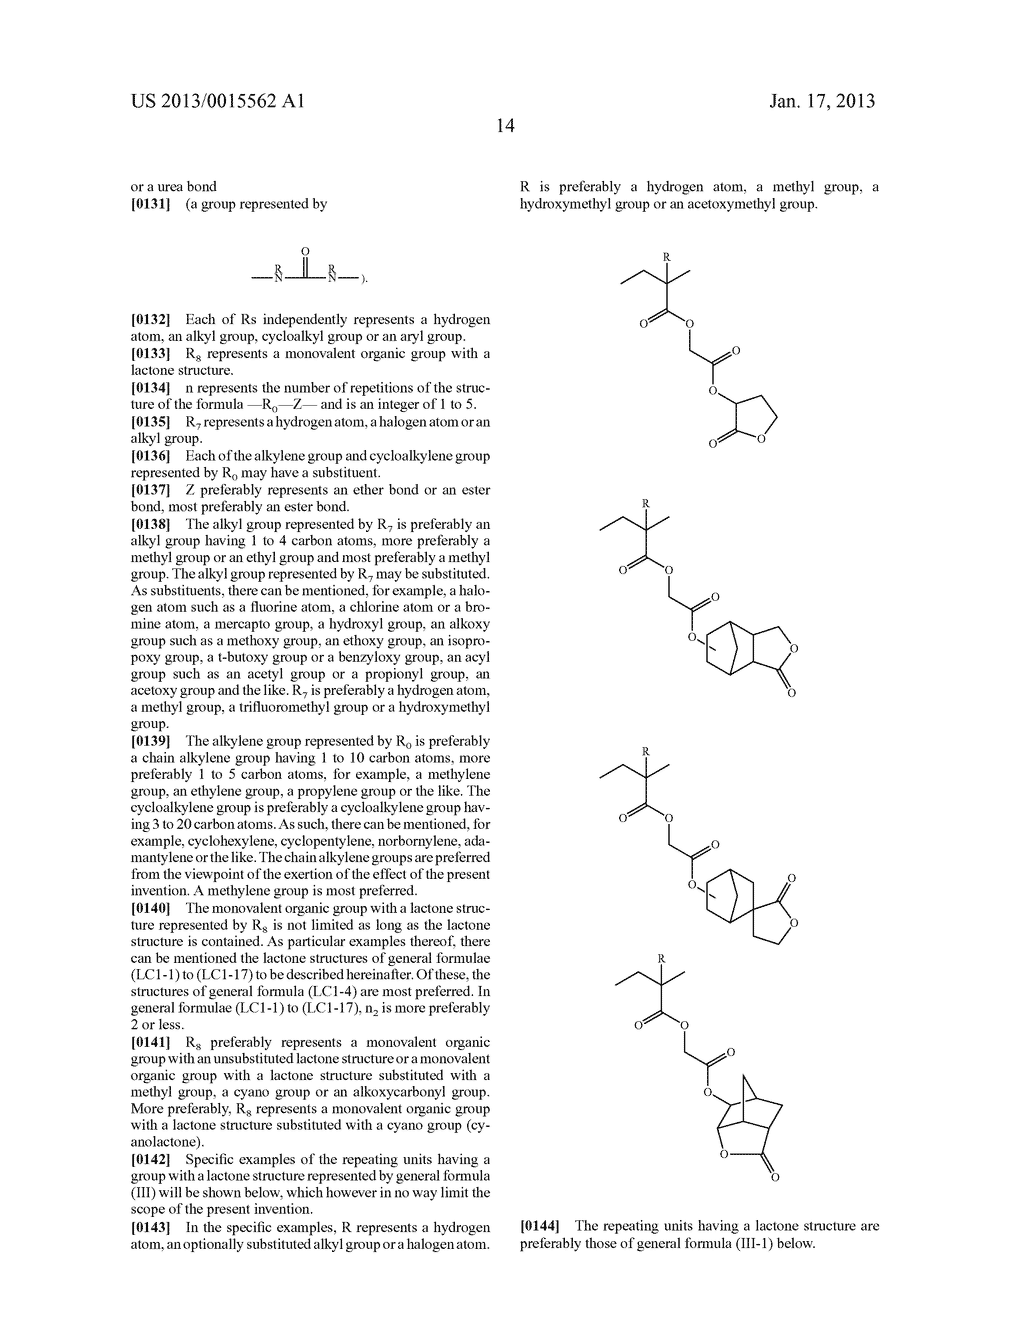 ACTINIC-RAY- OR RADIATION-SENSITIVE RESIN COMPOSITION, ACTINIC-RAY- OR     RADIATION-SENSITIVE FILM THEREFROM AND METHOD OF FORMING PATTERN USING     THE COMPOSITIONAANM Yamamoto; KeiAACI Haibara-gunAACO JPAAGP Yamamoto; Kei Haibara-gun JPAANM Fujita; MitsuhiroAACI Haibara-gunAACO JPAAGP Fujita; Mitsuhiro Haibara-gun JPAANM Matsuda; TomokiAACI Haibara-gunAACO JPAAGP Matsuda; Tomoki Haibara-gun JP - diagram, schematic, and image 15